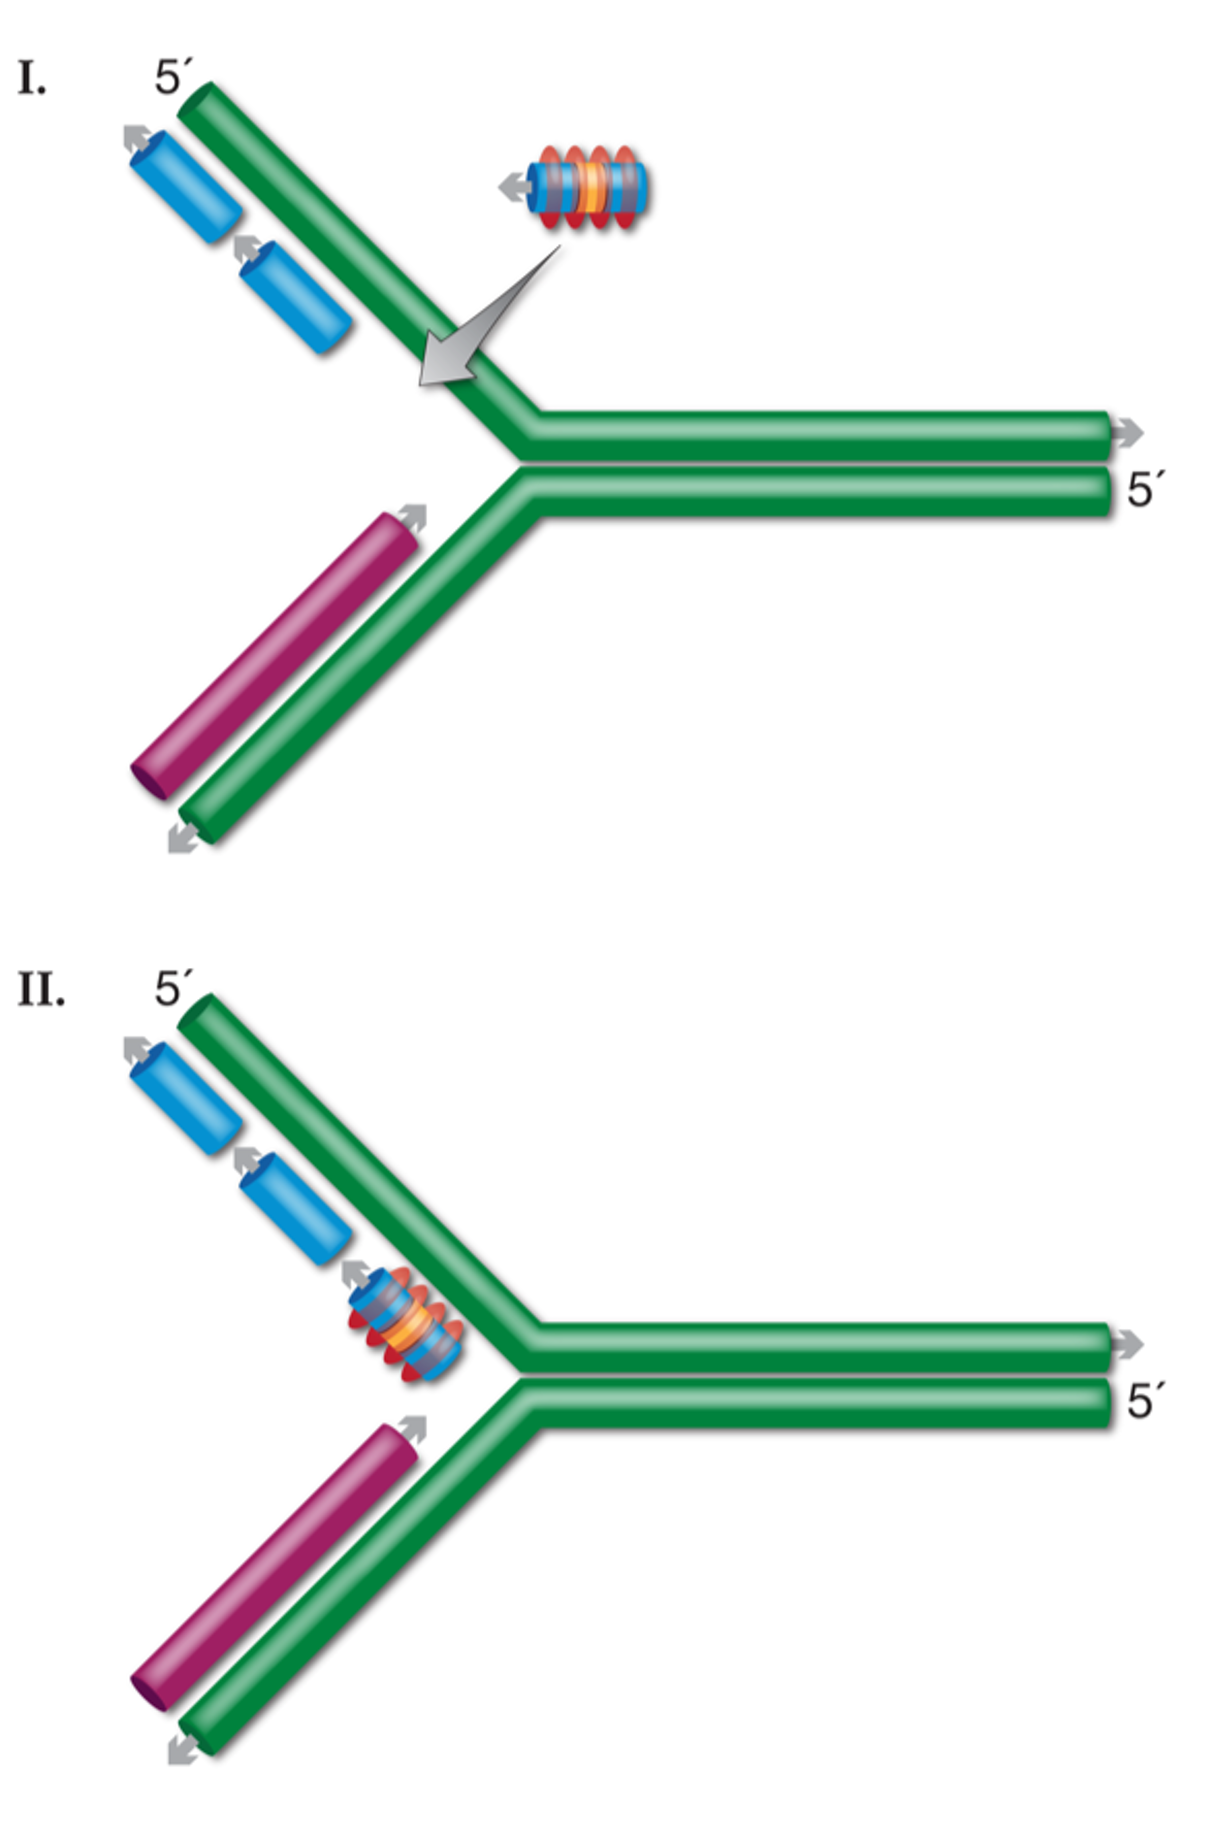 Model for ssDNA recombination.